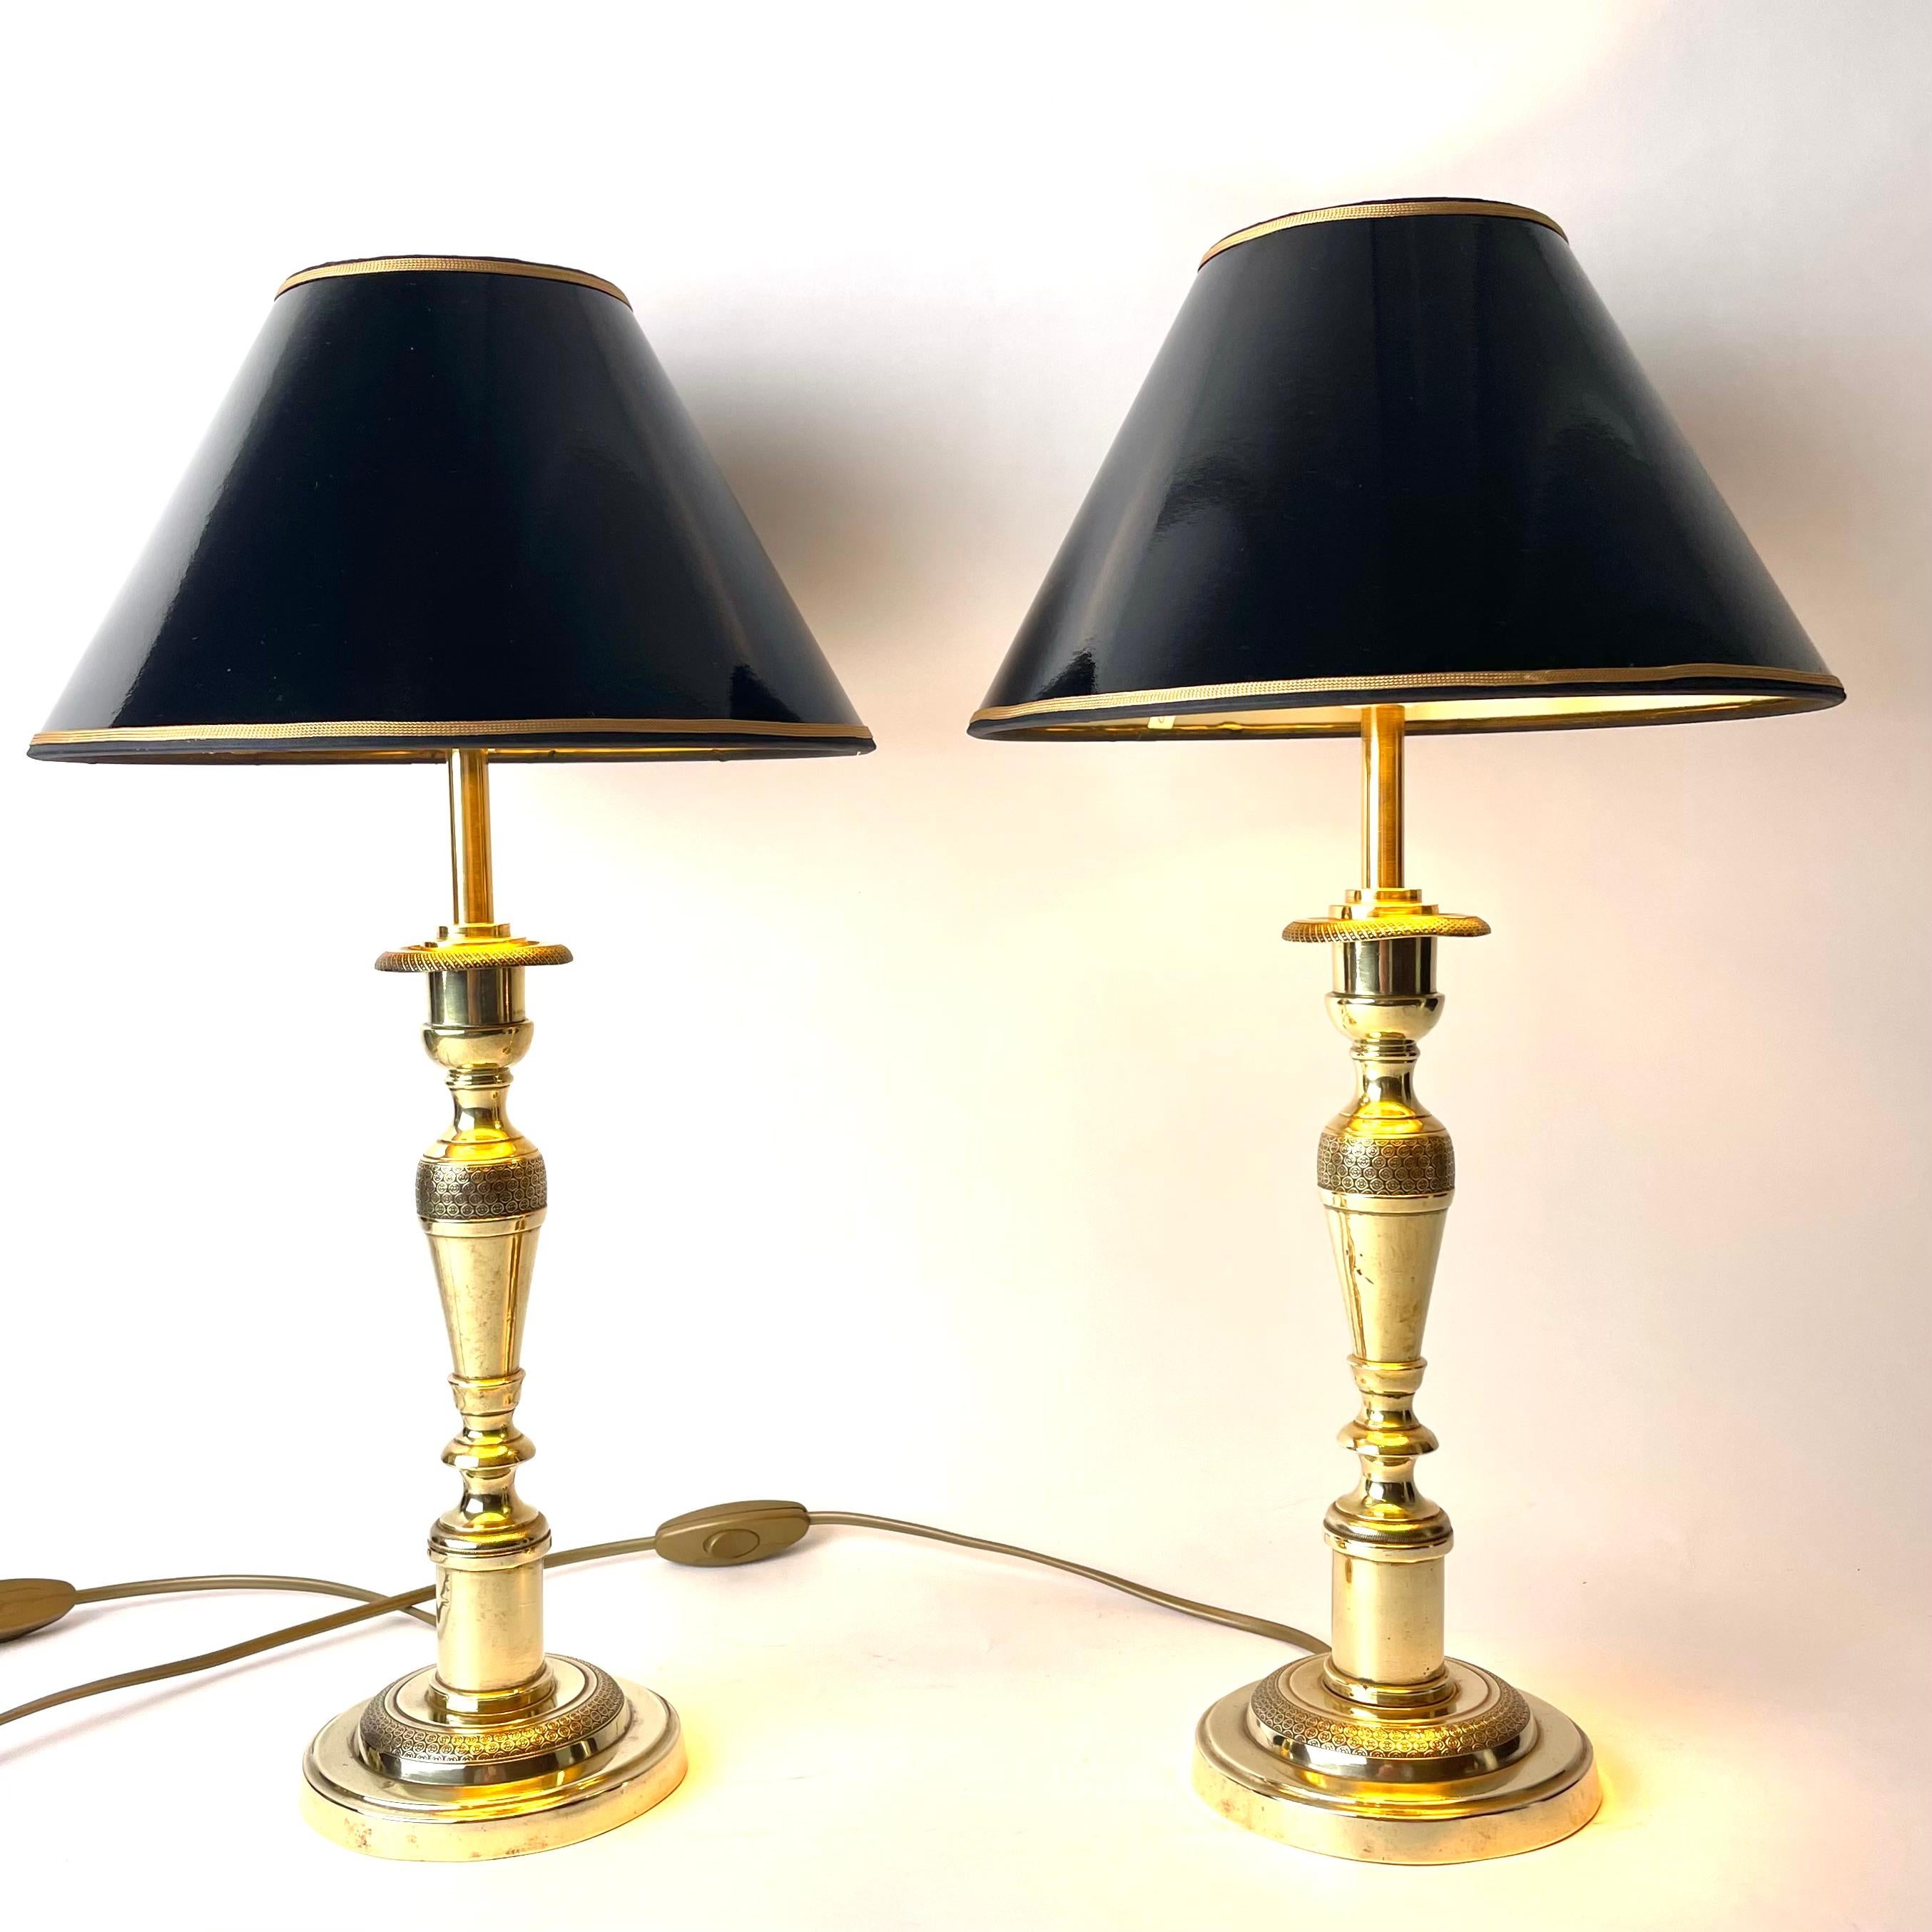 Pair of Elegant Empire Table Lamps in Brass. Early 19th Century France, originally candlesticks. 

This pair of exquisite table lamps combine excellent neoclassical forms of column bases and urns with Empire sensibilities in ornamentation. Areas of